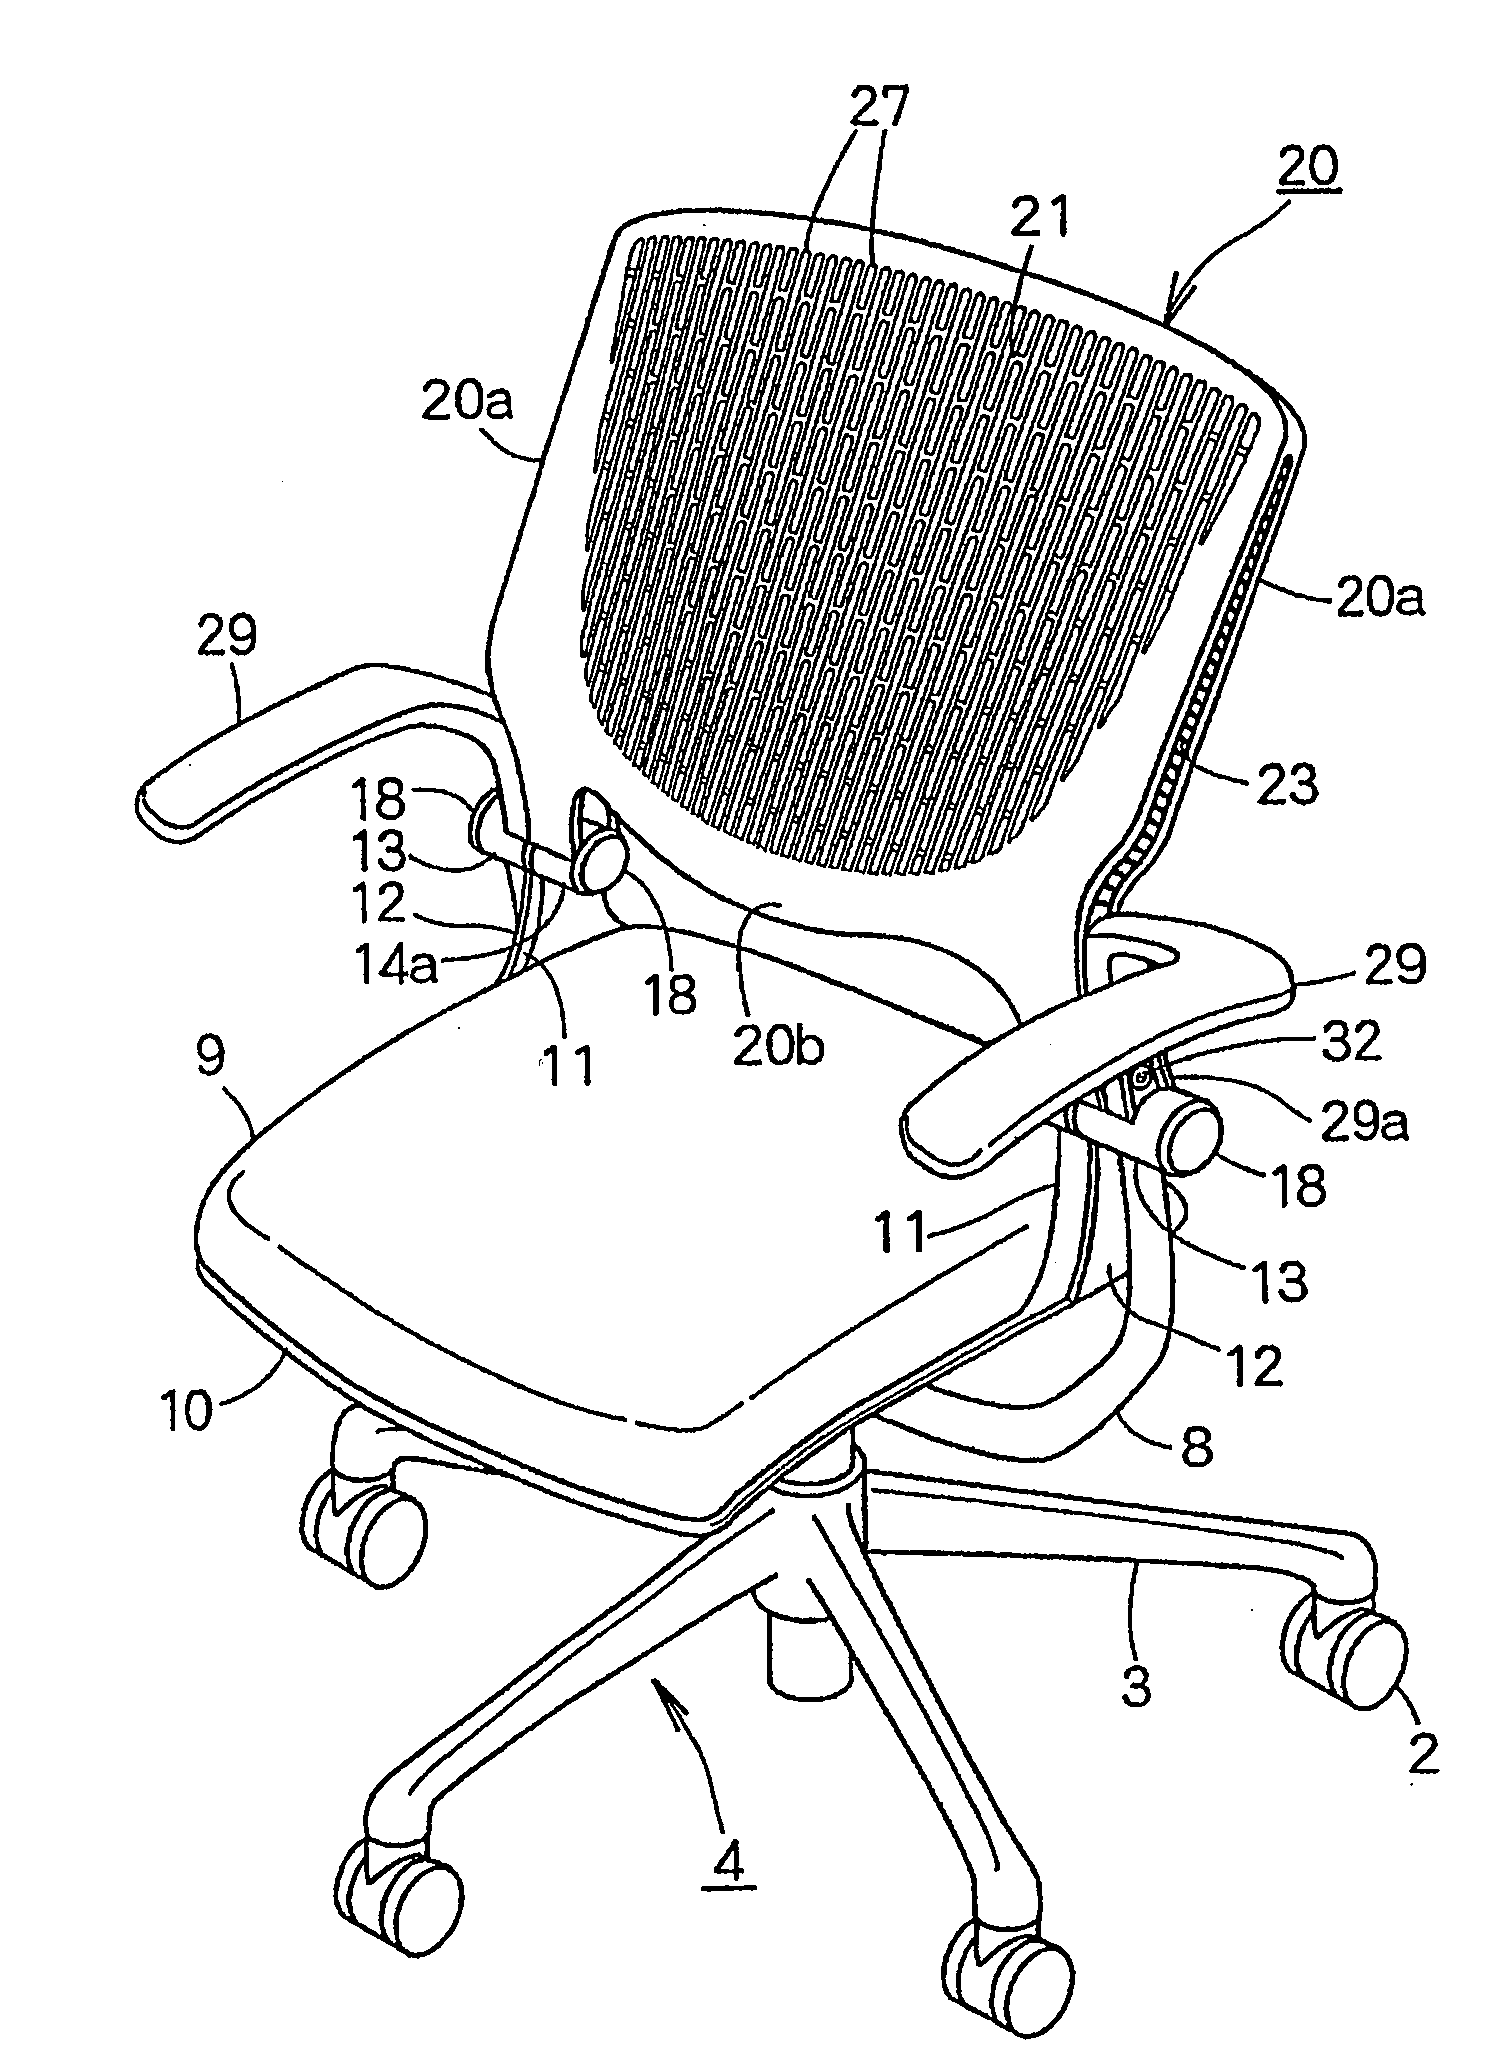 Backrest device in a chair